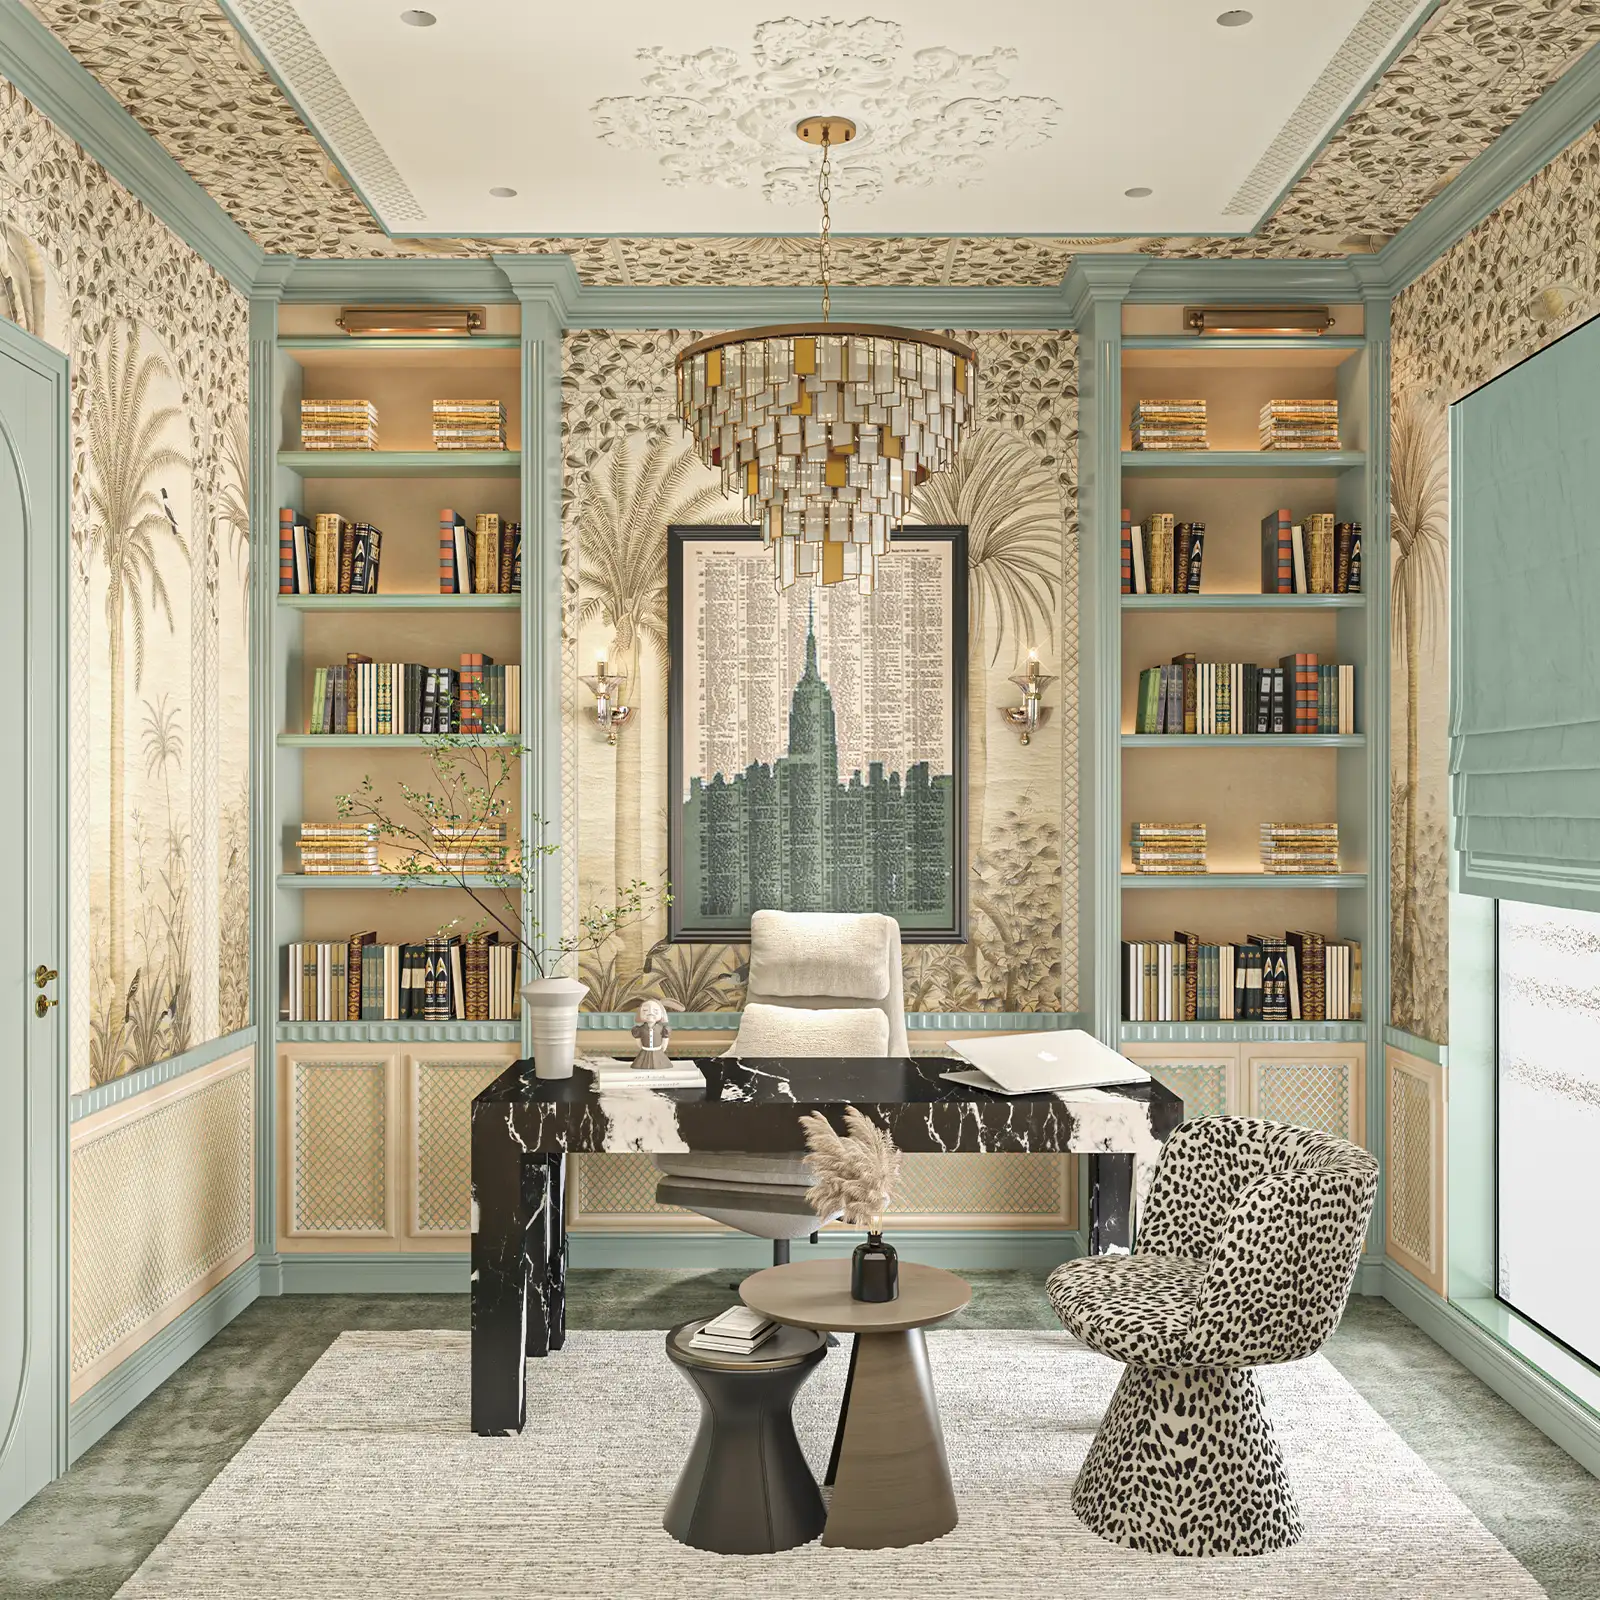 Refined home office interior design featuring pastel green built-in bookshelves, an elegant black marble desk, a chic leopard print armchair, and a sophisticated chandelier, all set against a backdrop of decorative palm wallpaper and a ceiling with ornate moldings